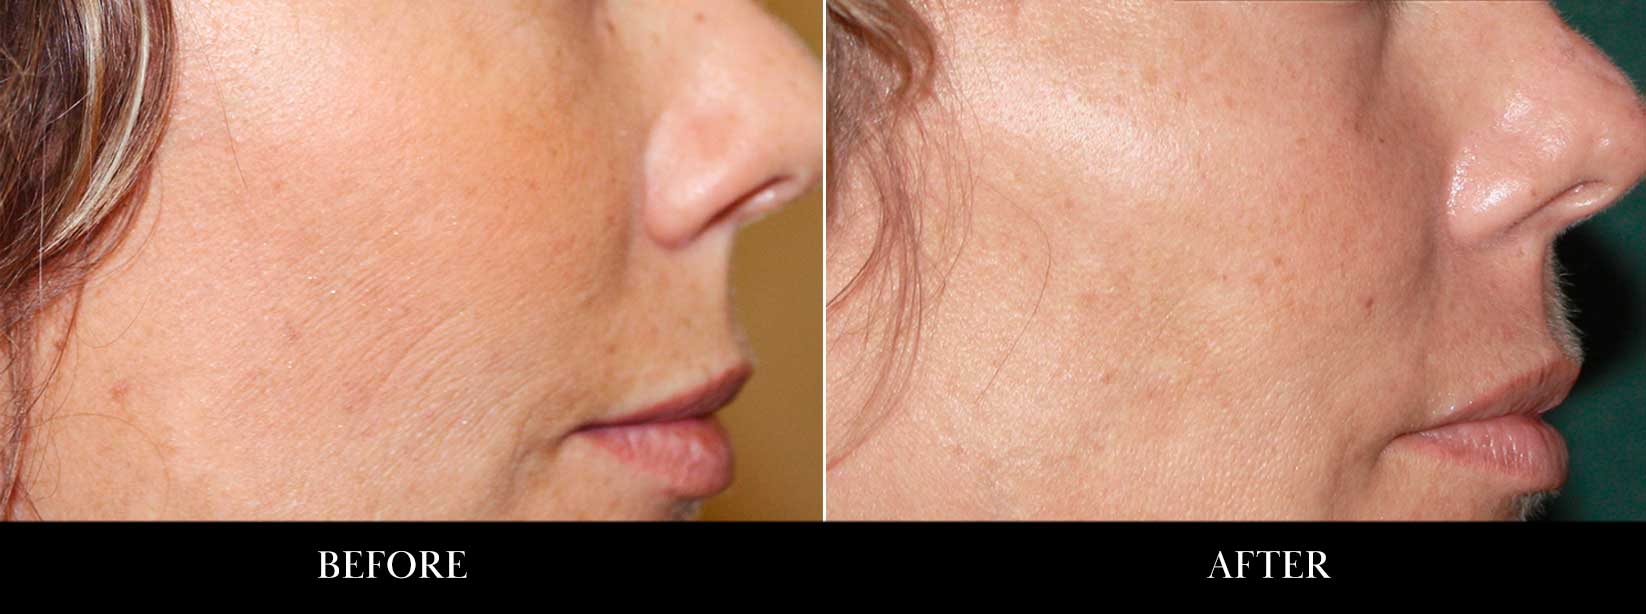 Microneedling treatment before and after pictures.